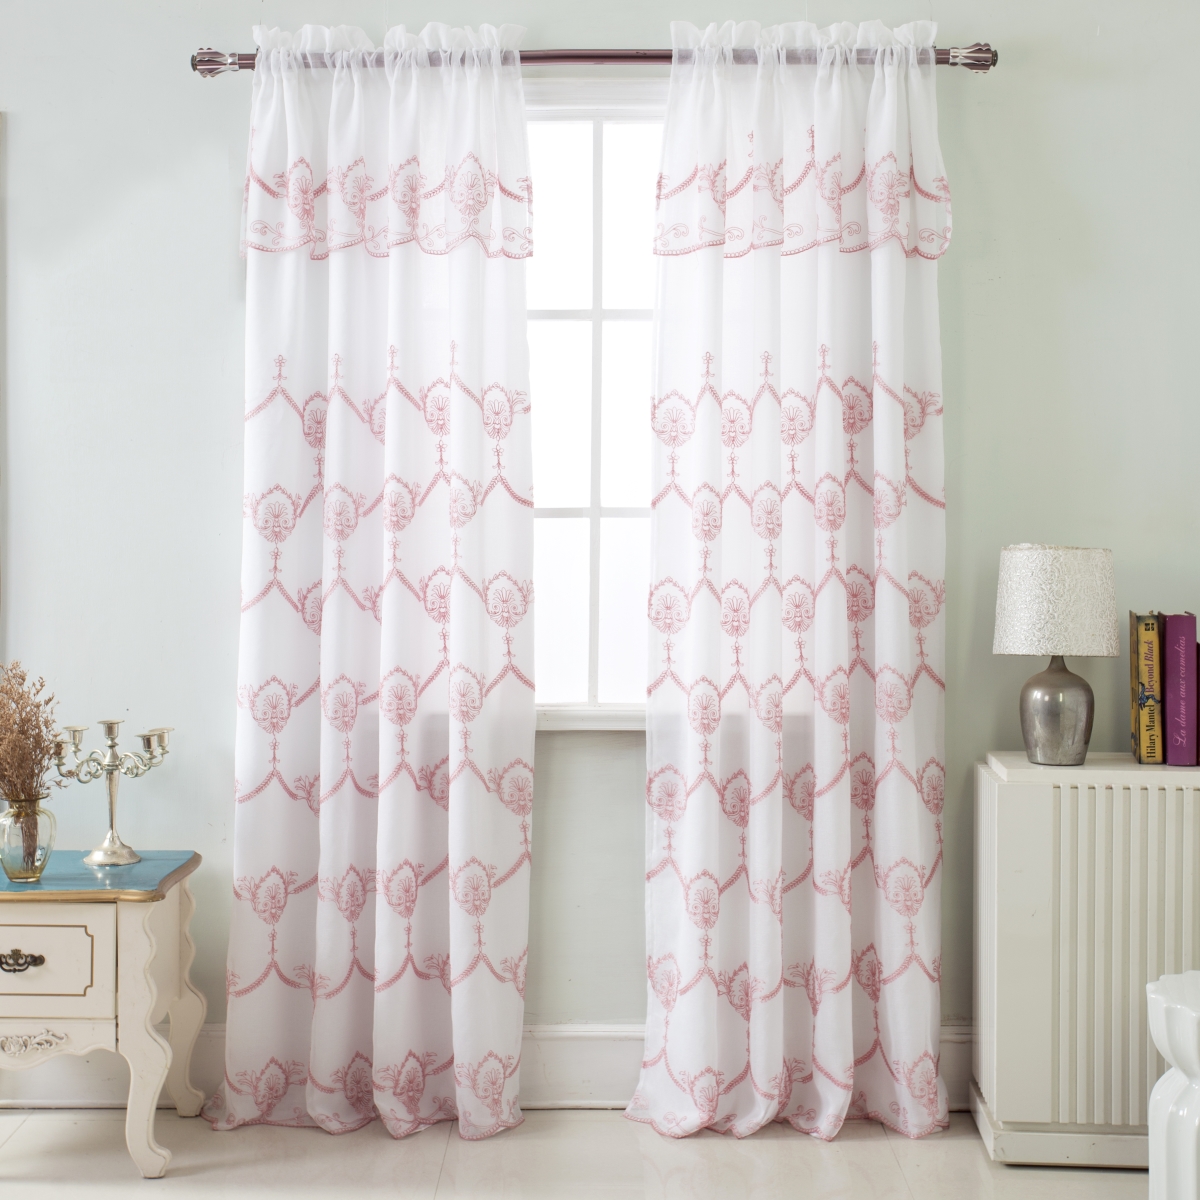 Pnr17079 54 X 84 In. Rochelle Embroidered Satin Layered Rod Pocket Single Curtain Panel With Attached 18 In. Valance, Rose